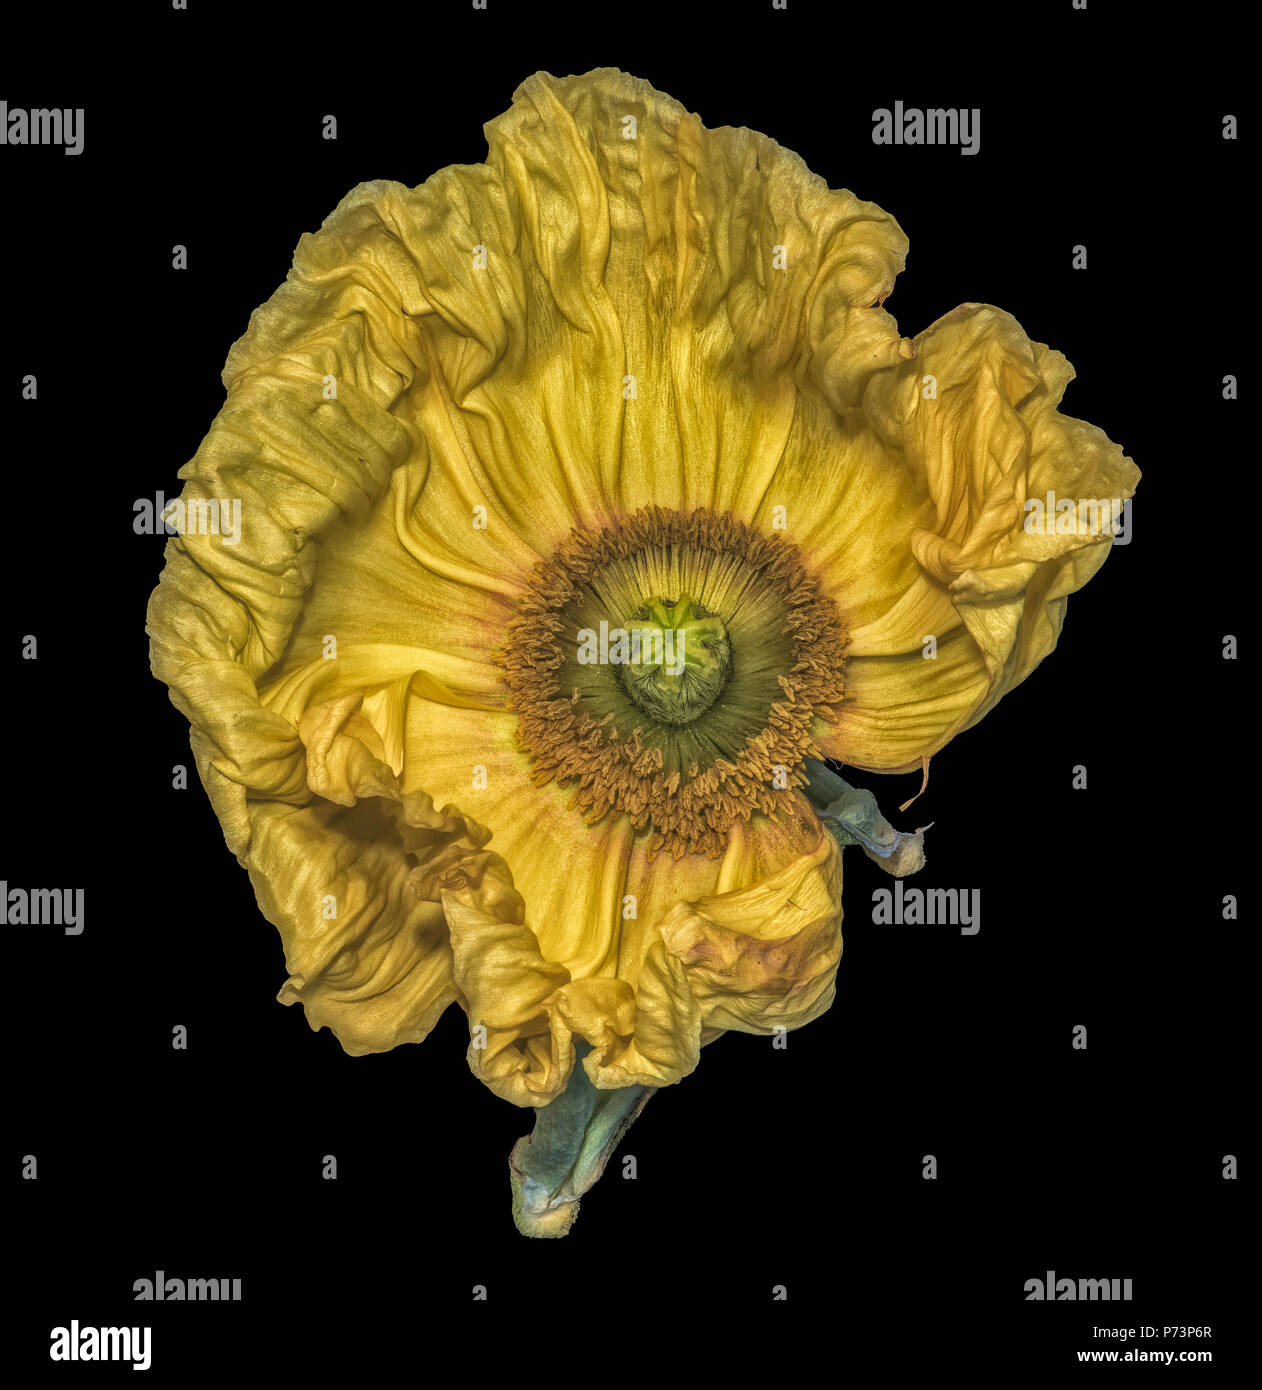 Floral fine art still life detailed color macro flower portrait of a yellow satin/silk poppy wide opened blossom isolated on black background Stock Photo